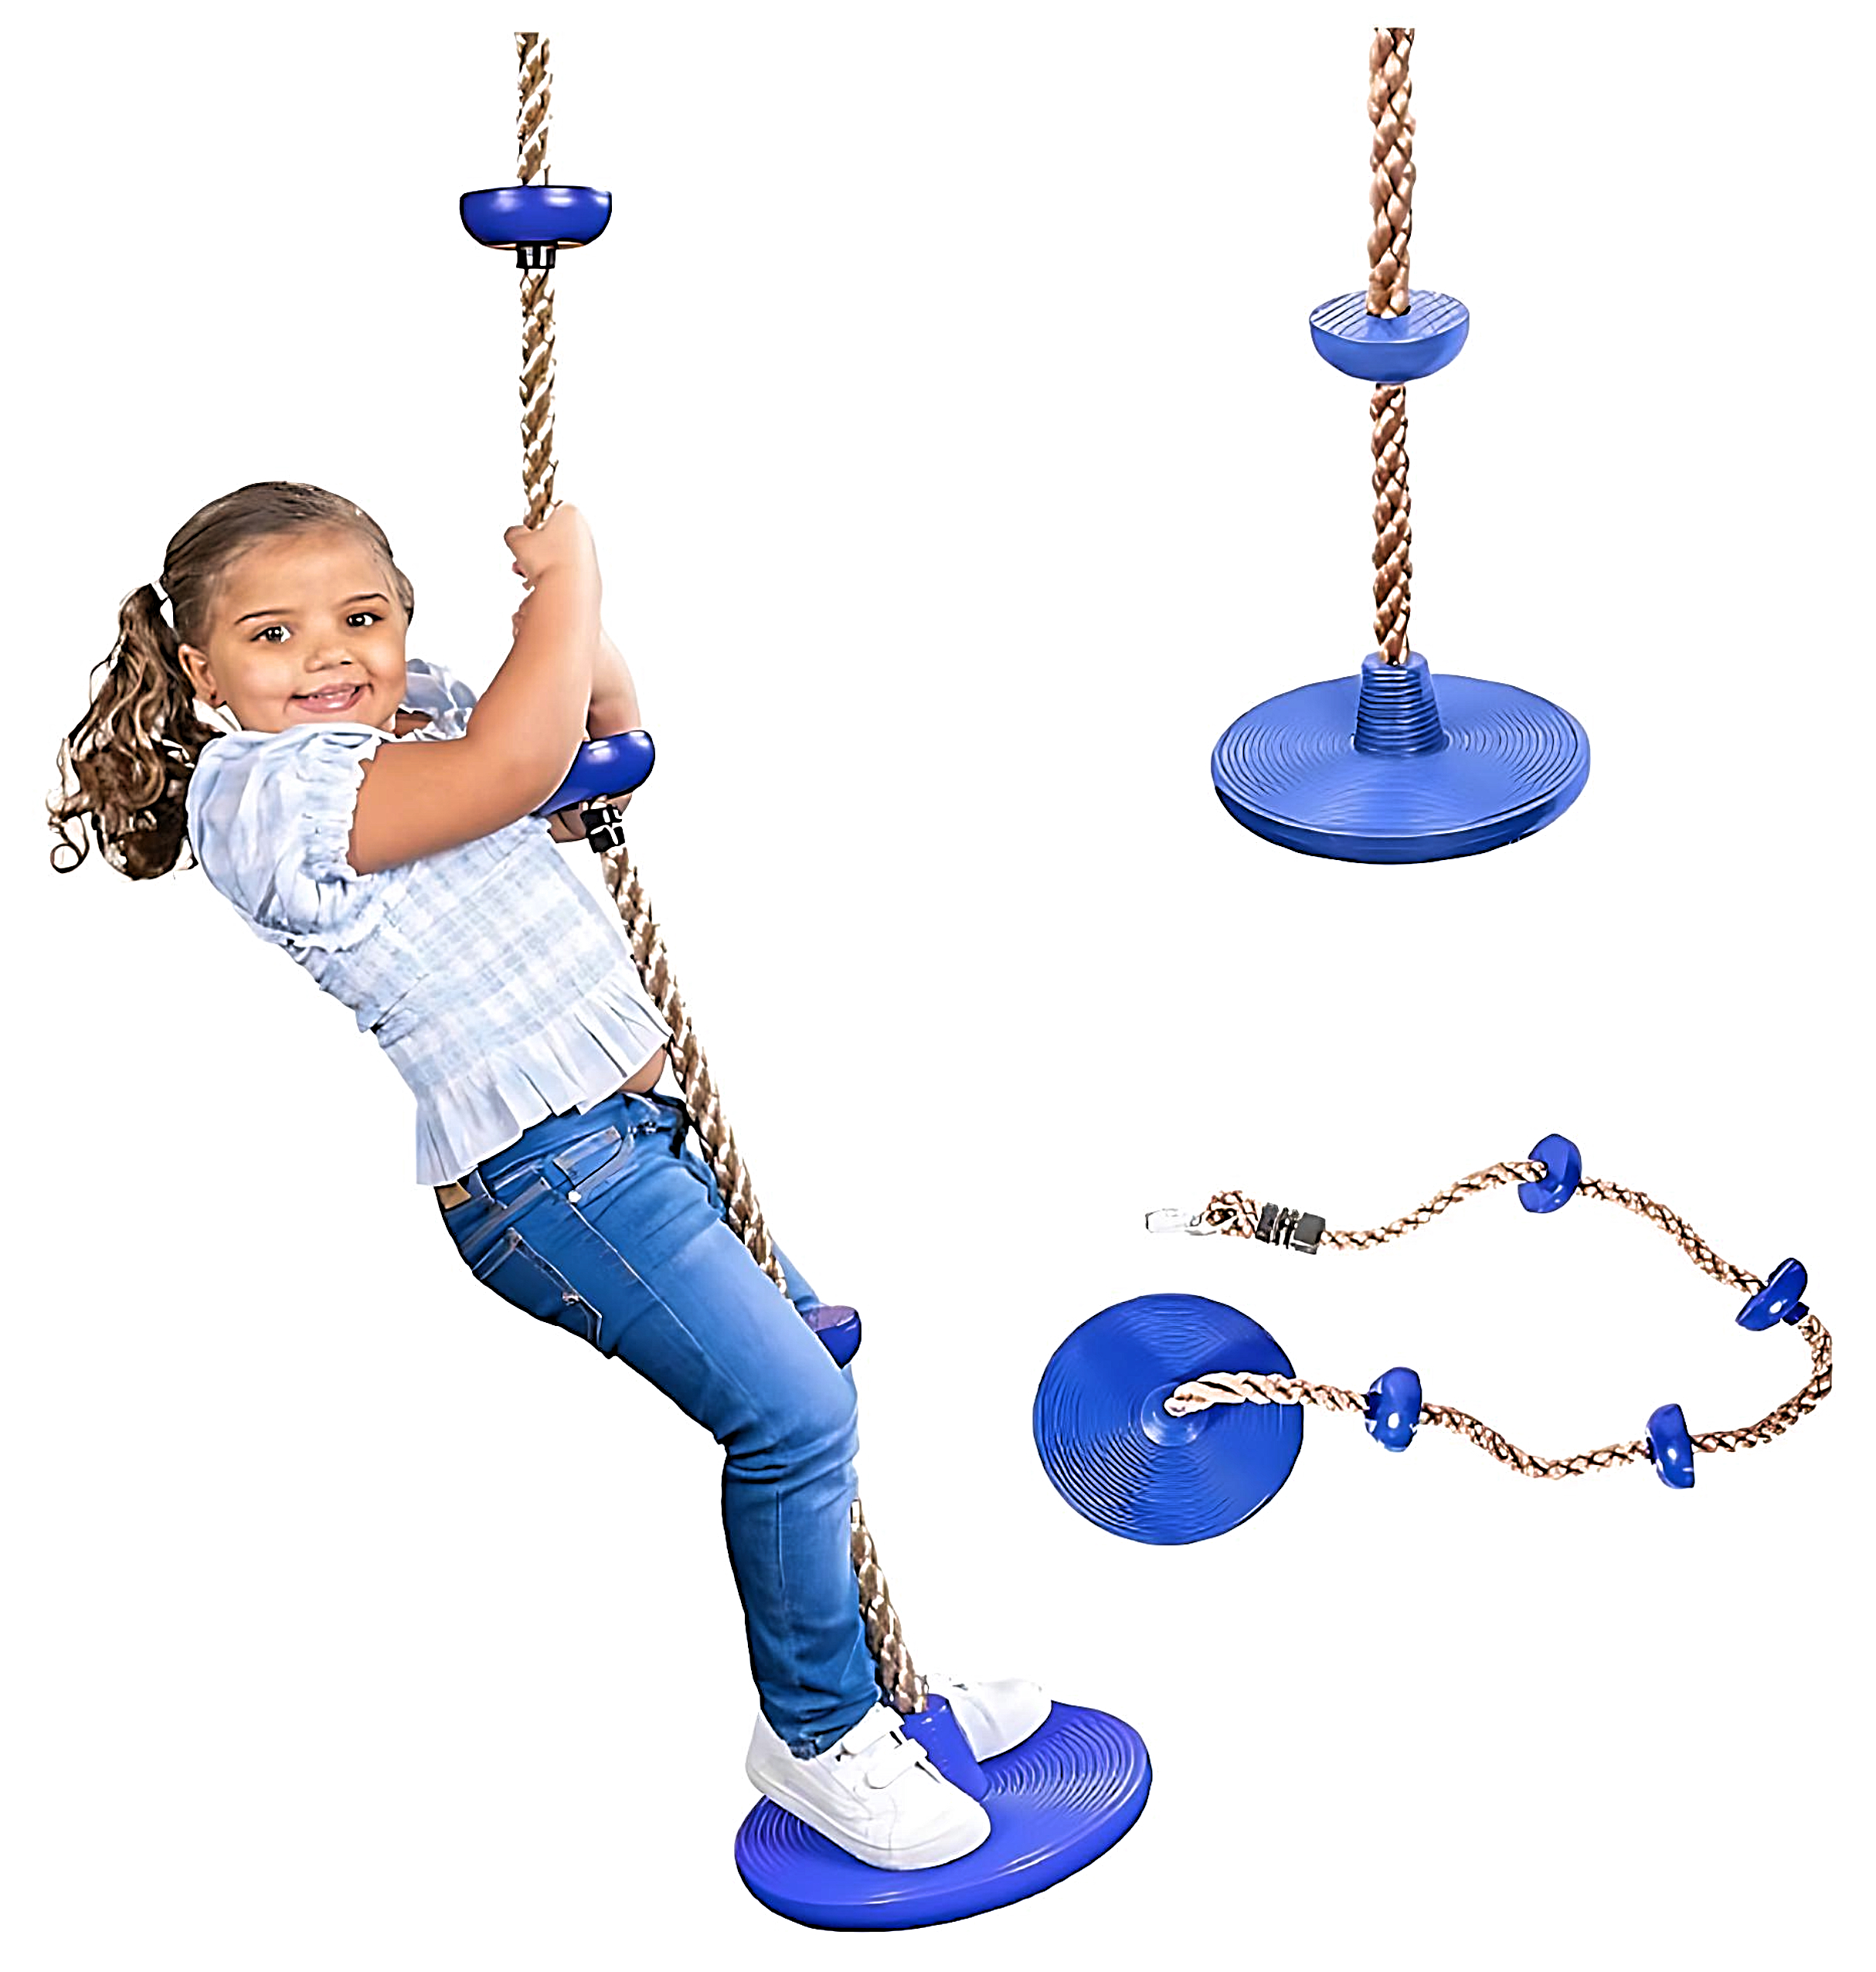 3in1 sensory swing disk: indoor and outdoor use